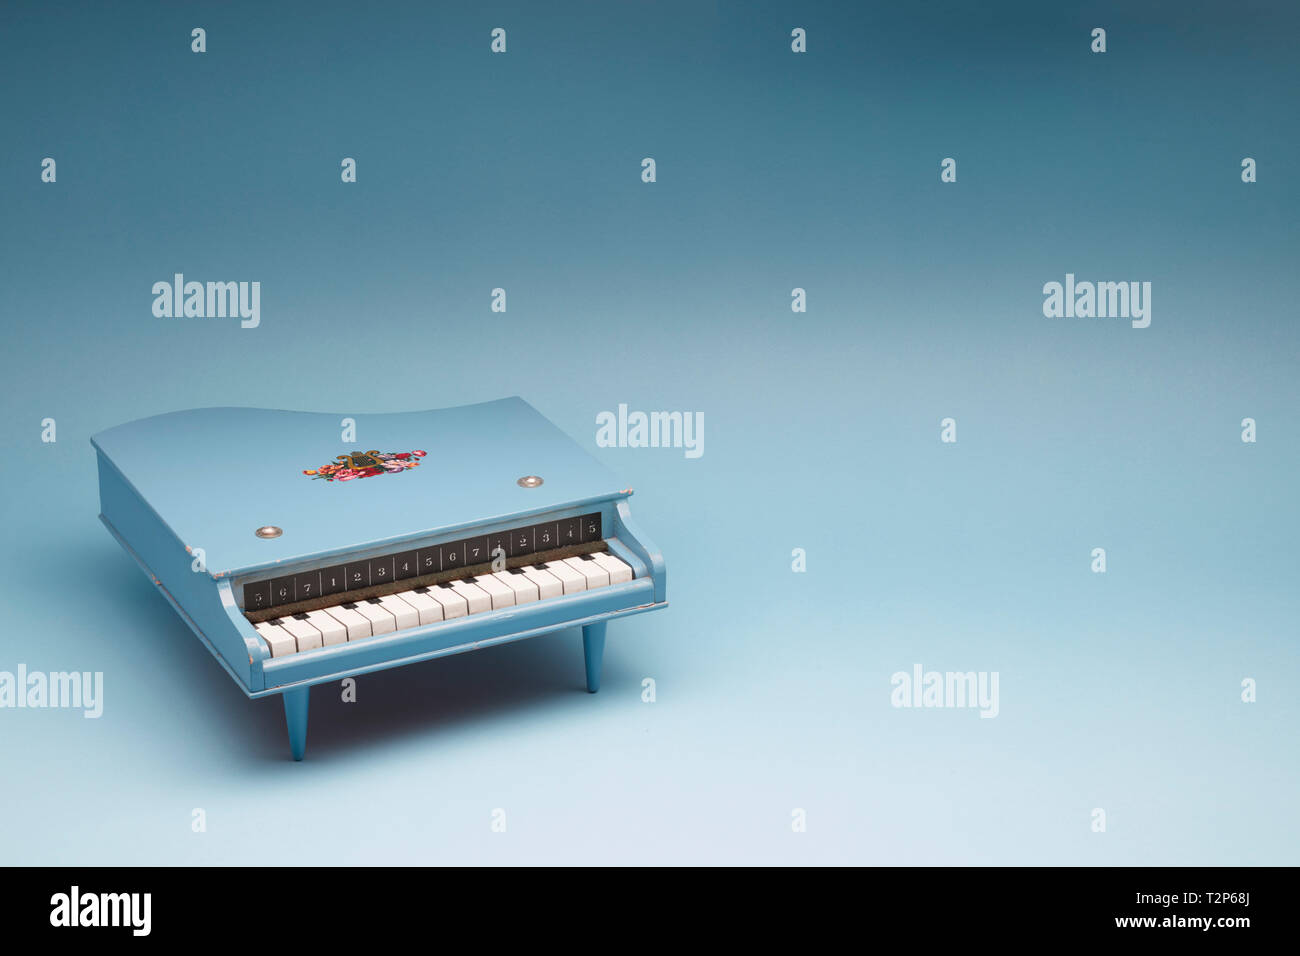 Toy grand piano on a blue background Stock Photo